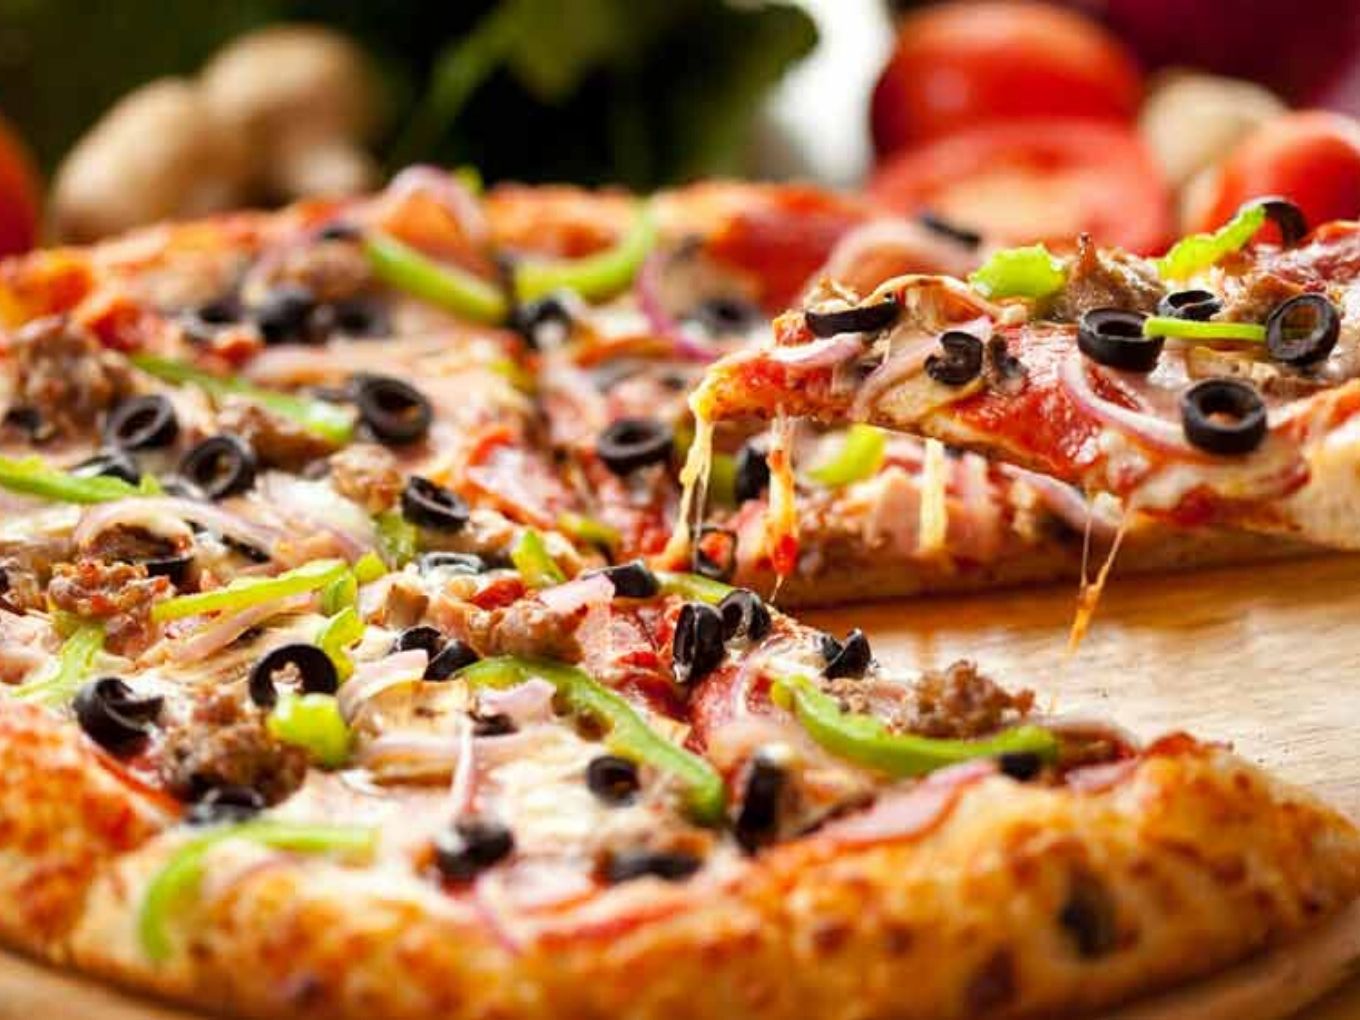 Restaurants Can’t Stop Working With Food Delivery Companies: Pizza Hut India Head